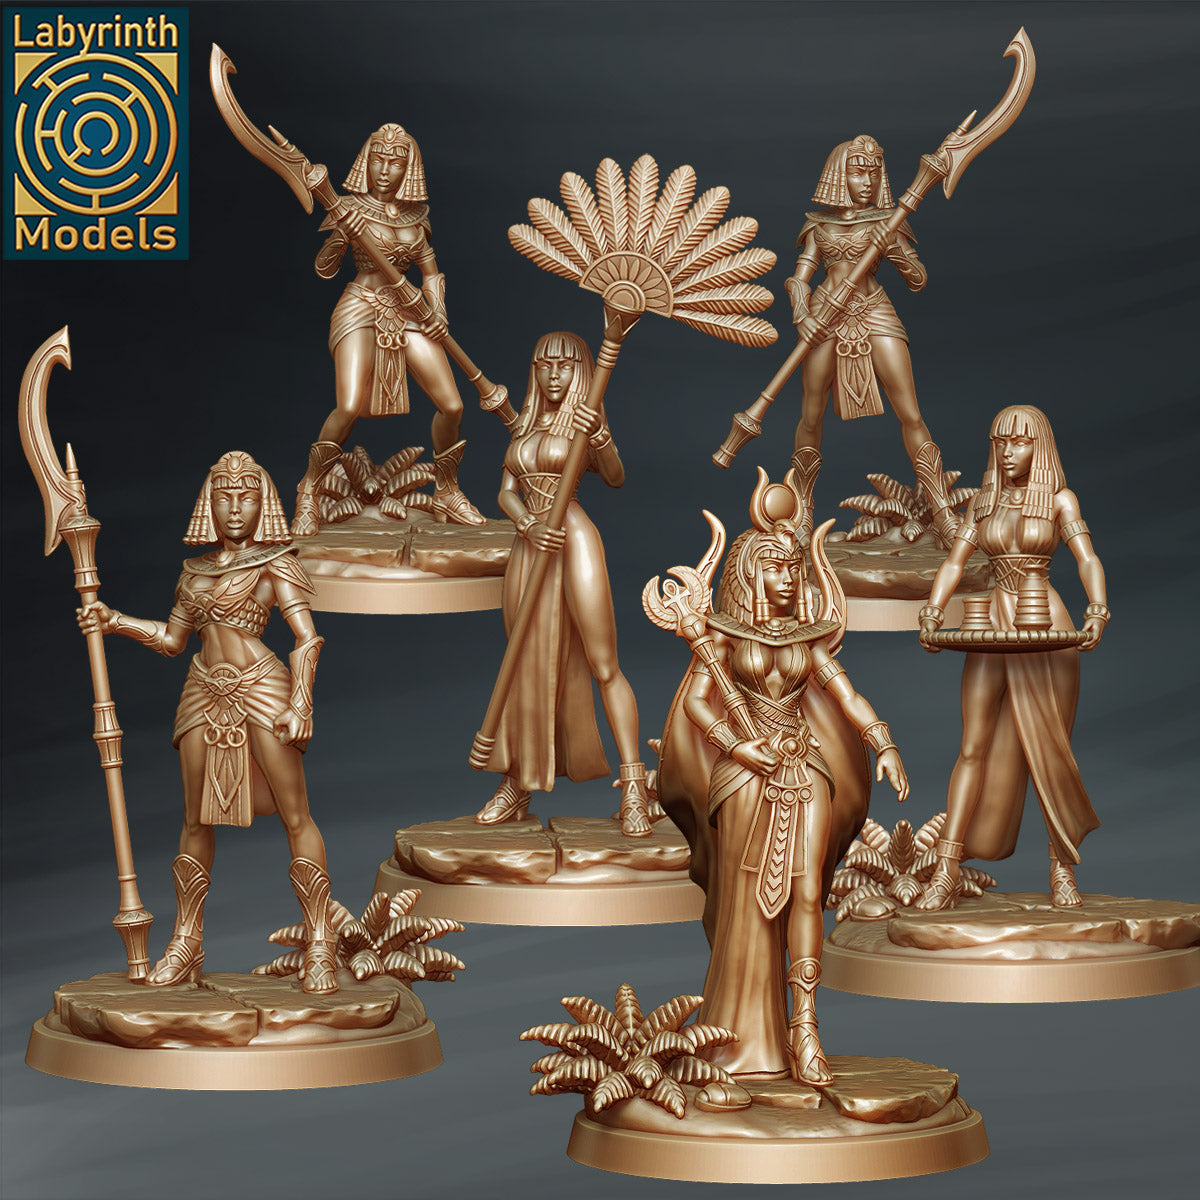 Queen's Retinue by Labyrinth Models